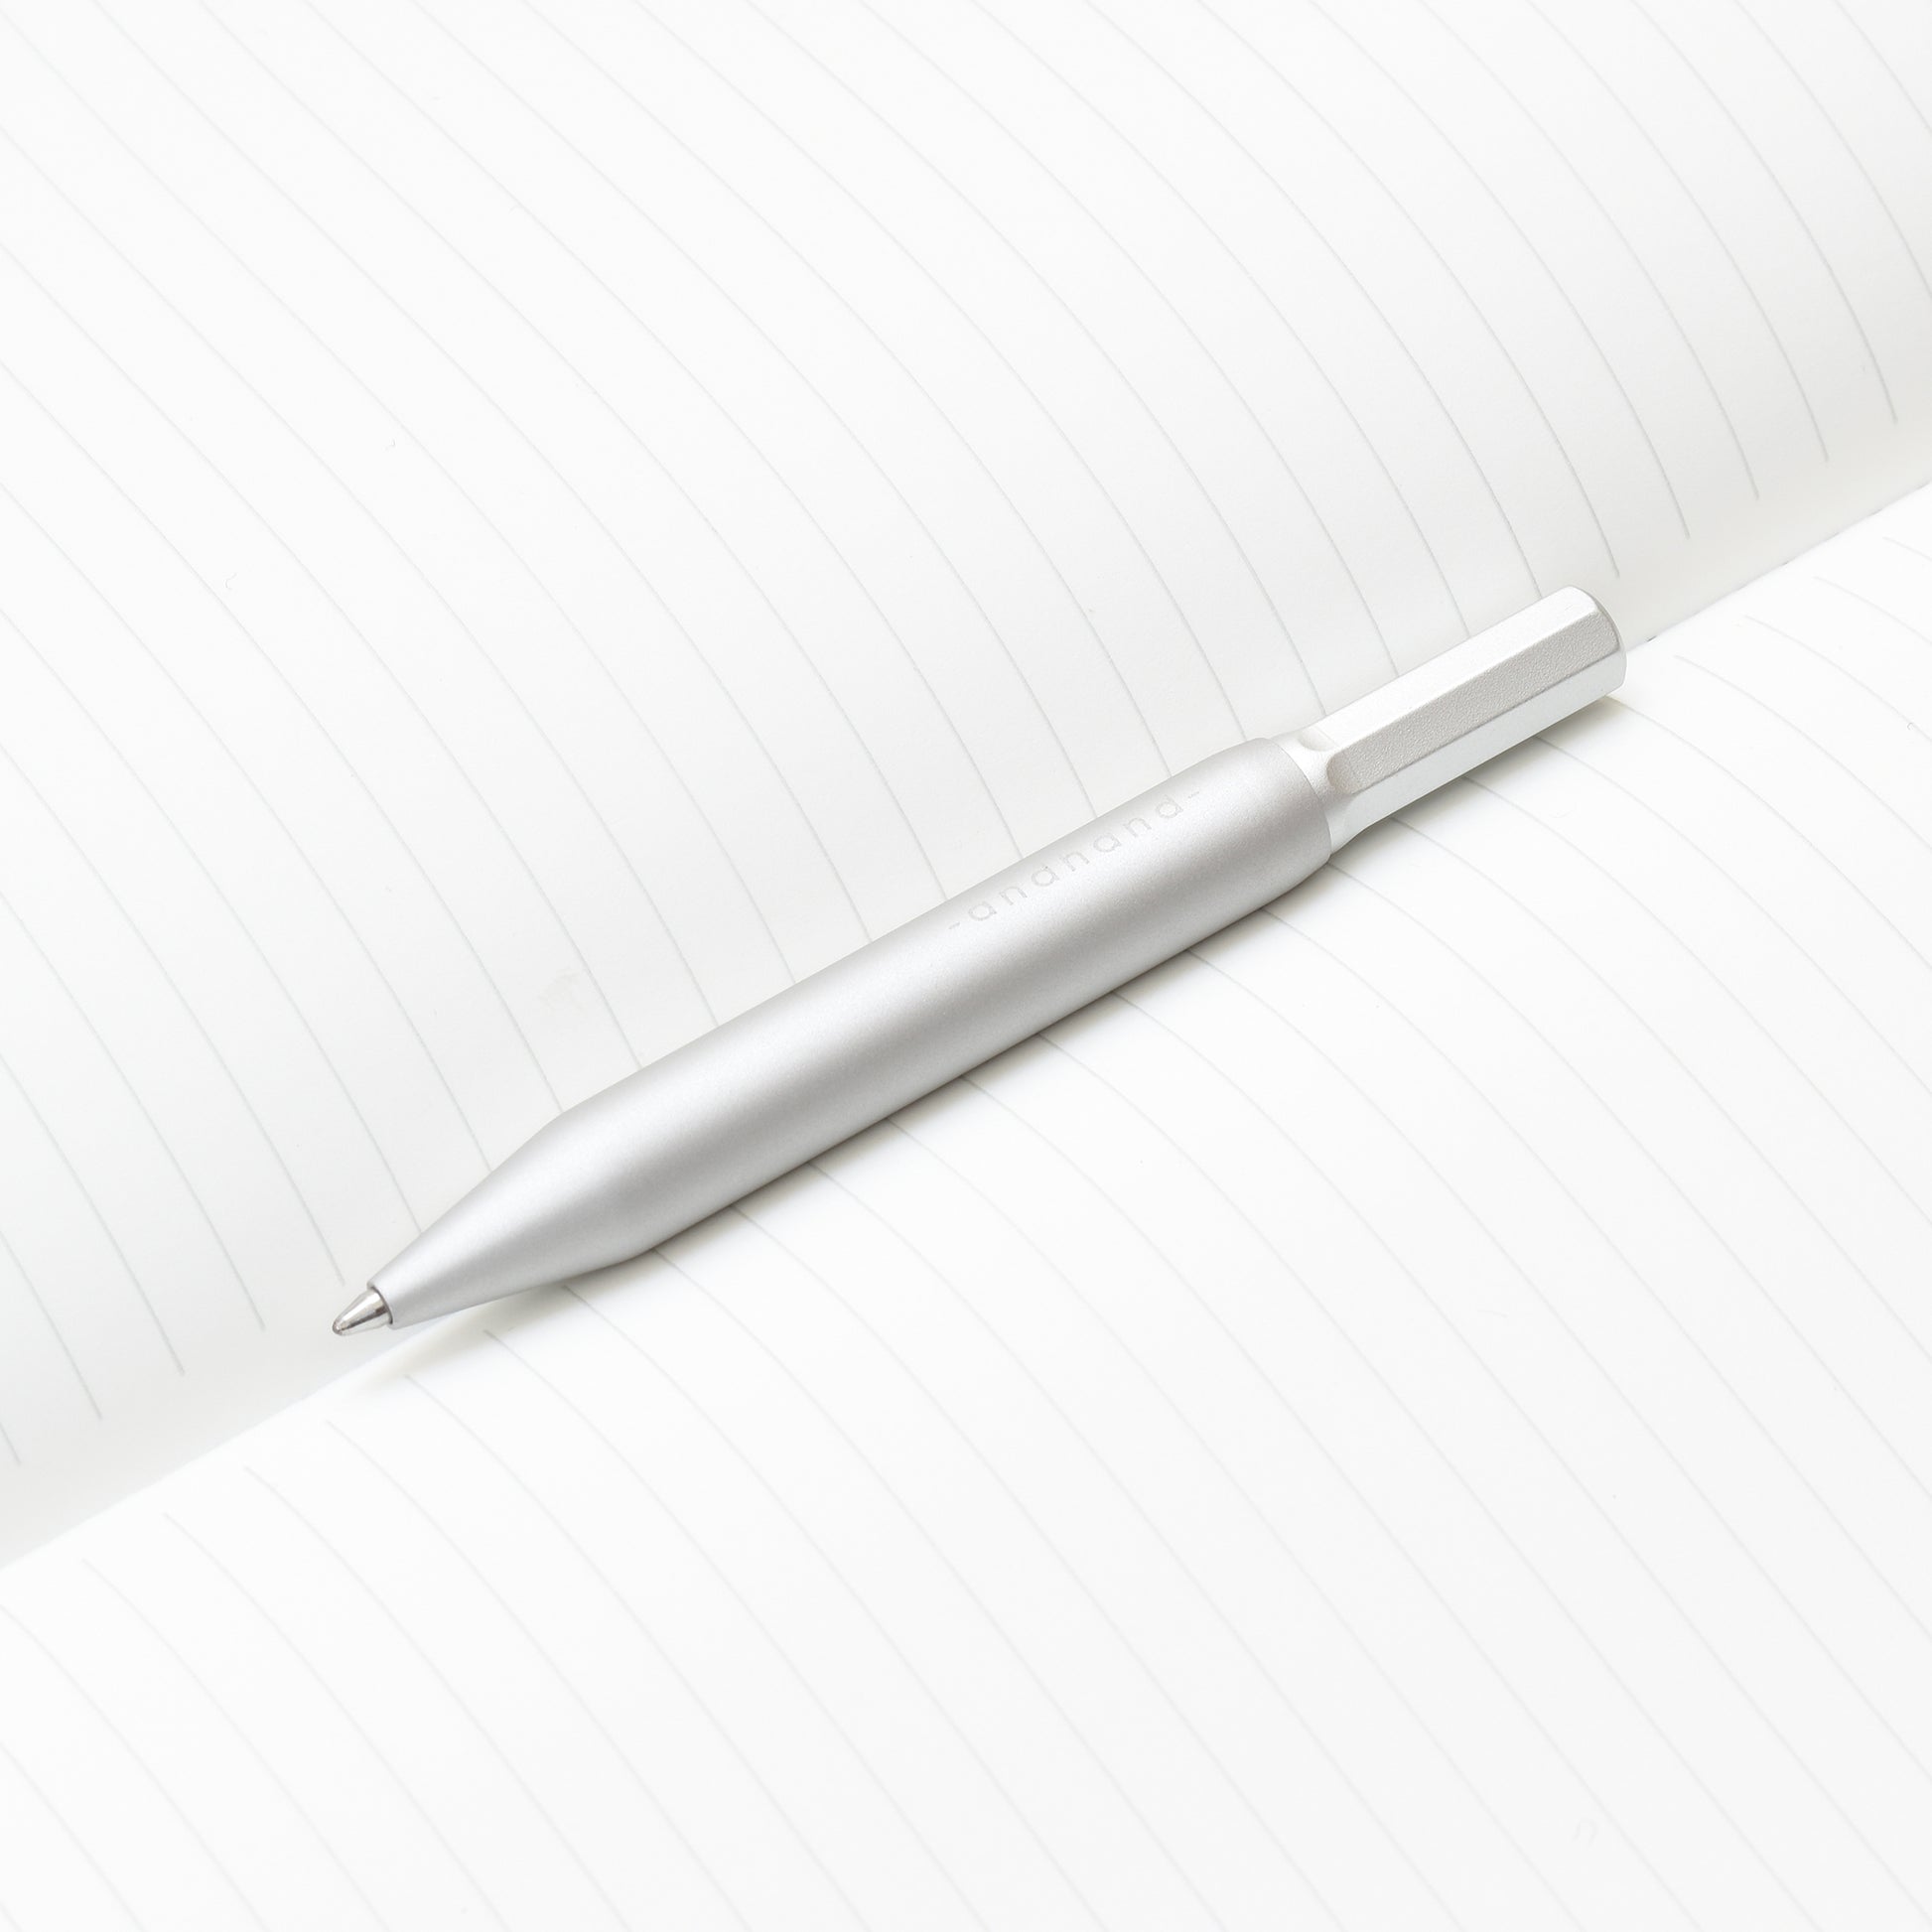 4 inch pen. Aluminium and brass everyday carry ballpoint pen from Andhand. An expert compact writing tool with a smooth mechanism and modern minimal design. Amazingly durable and refined. Shown here in silver lustre anodized finish.